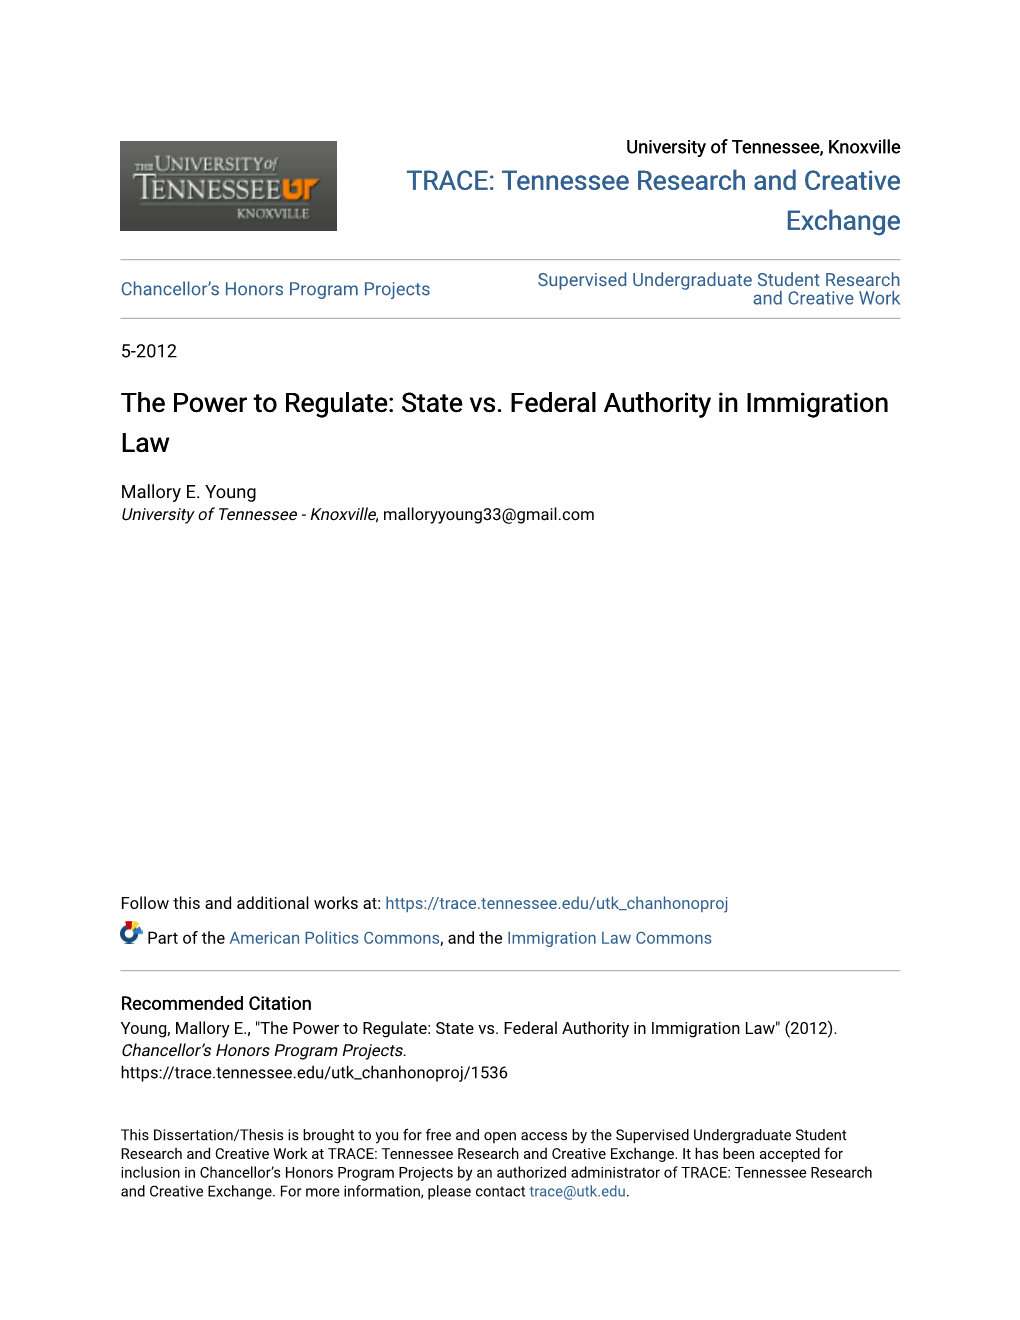 The Power to Regulate: State Vs. Federal Authority in Immigration Law